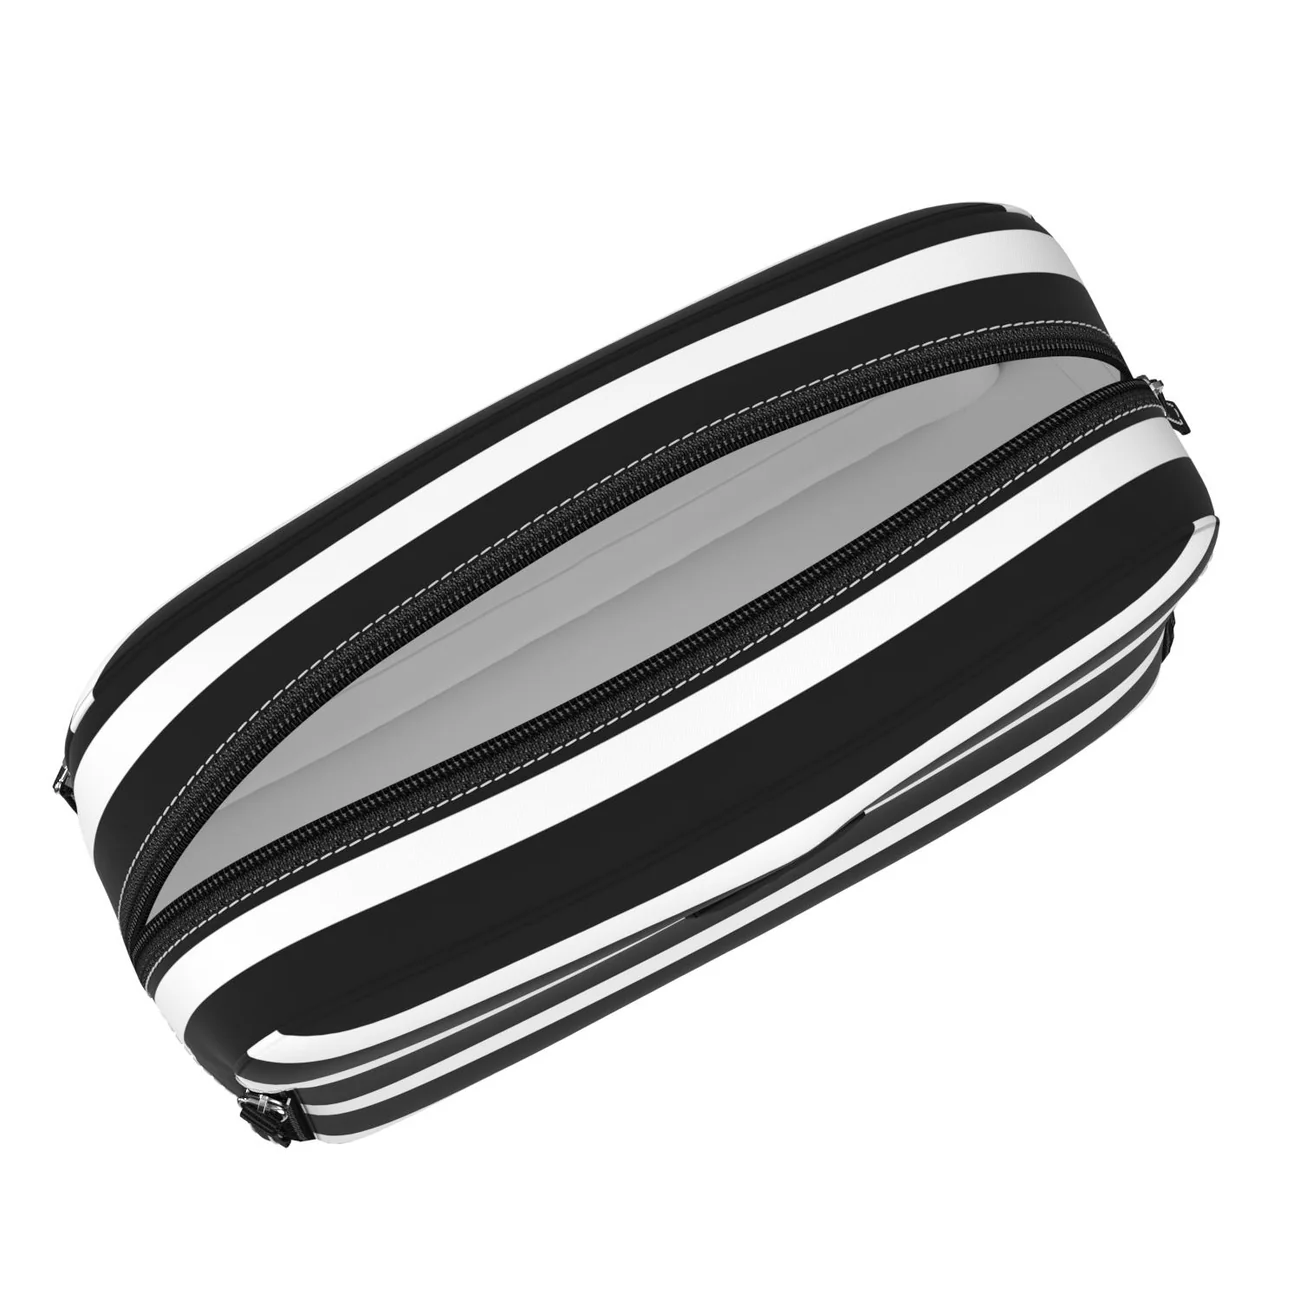 3-Way Toiletry Bag - Catch of the Day